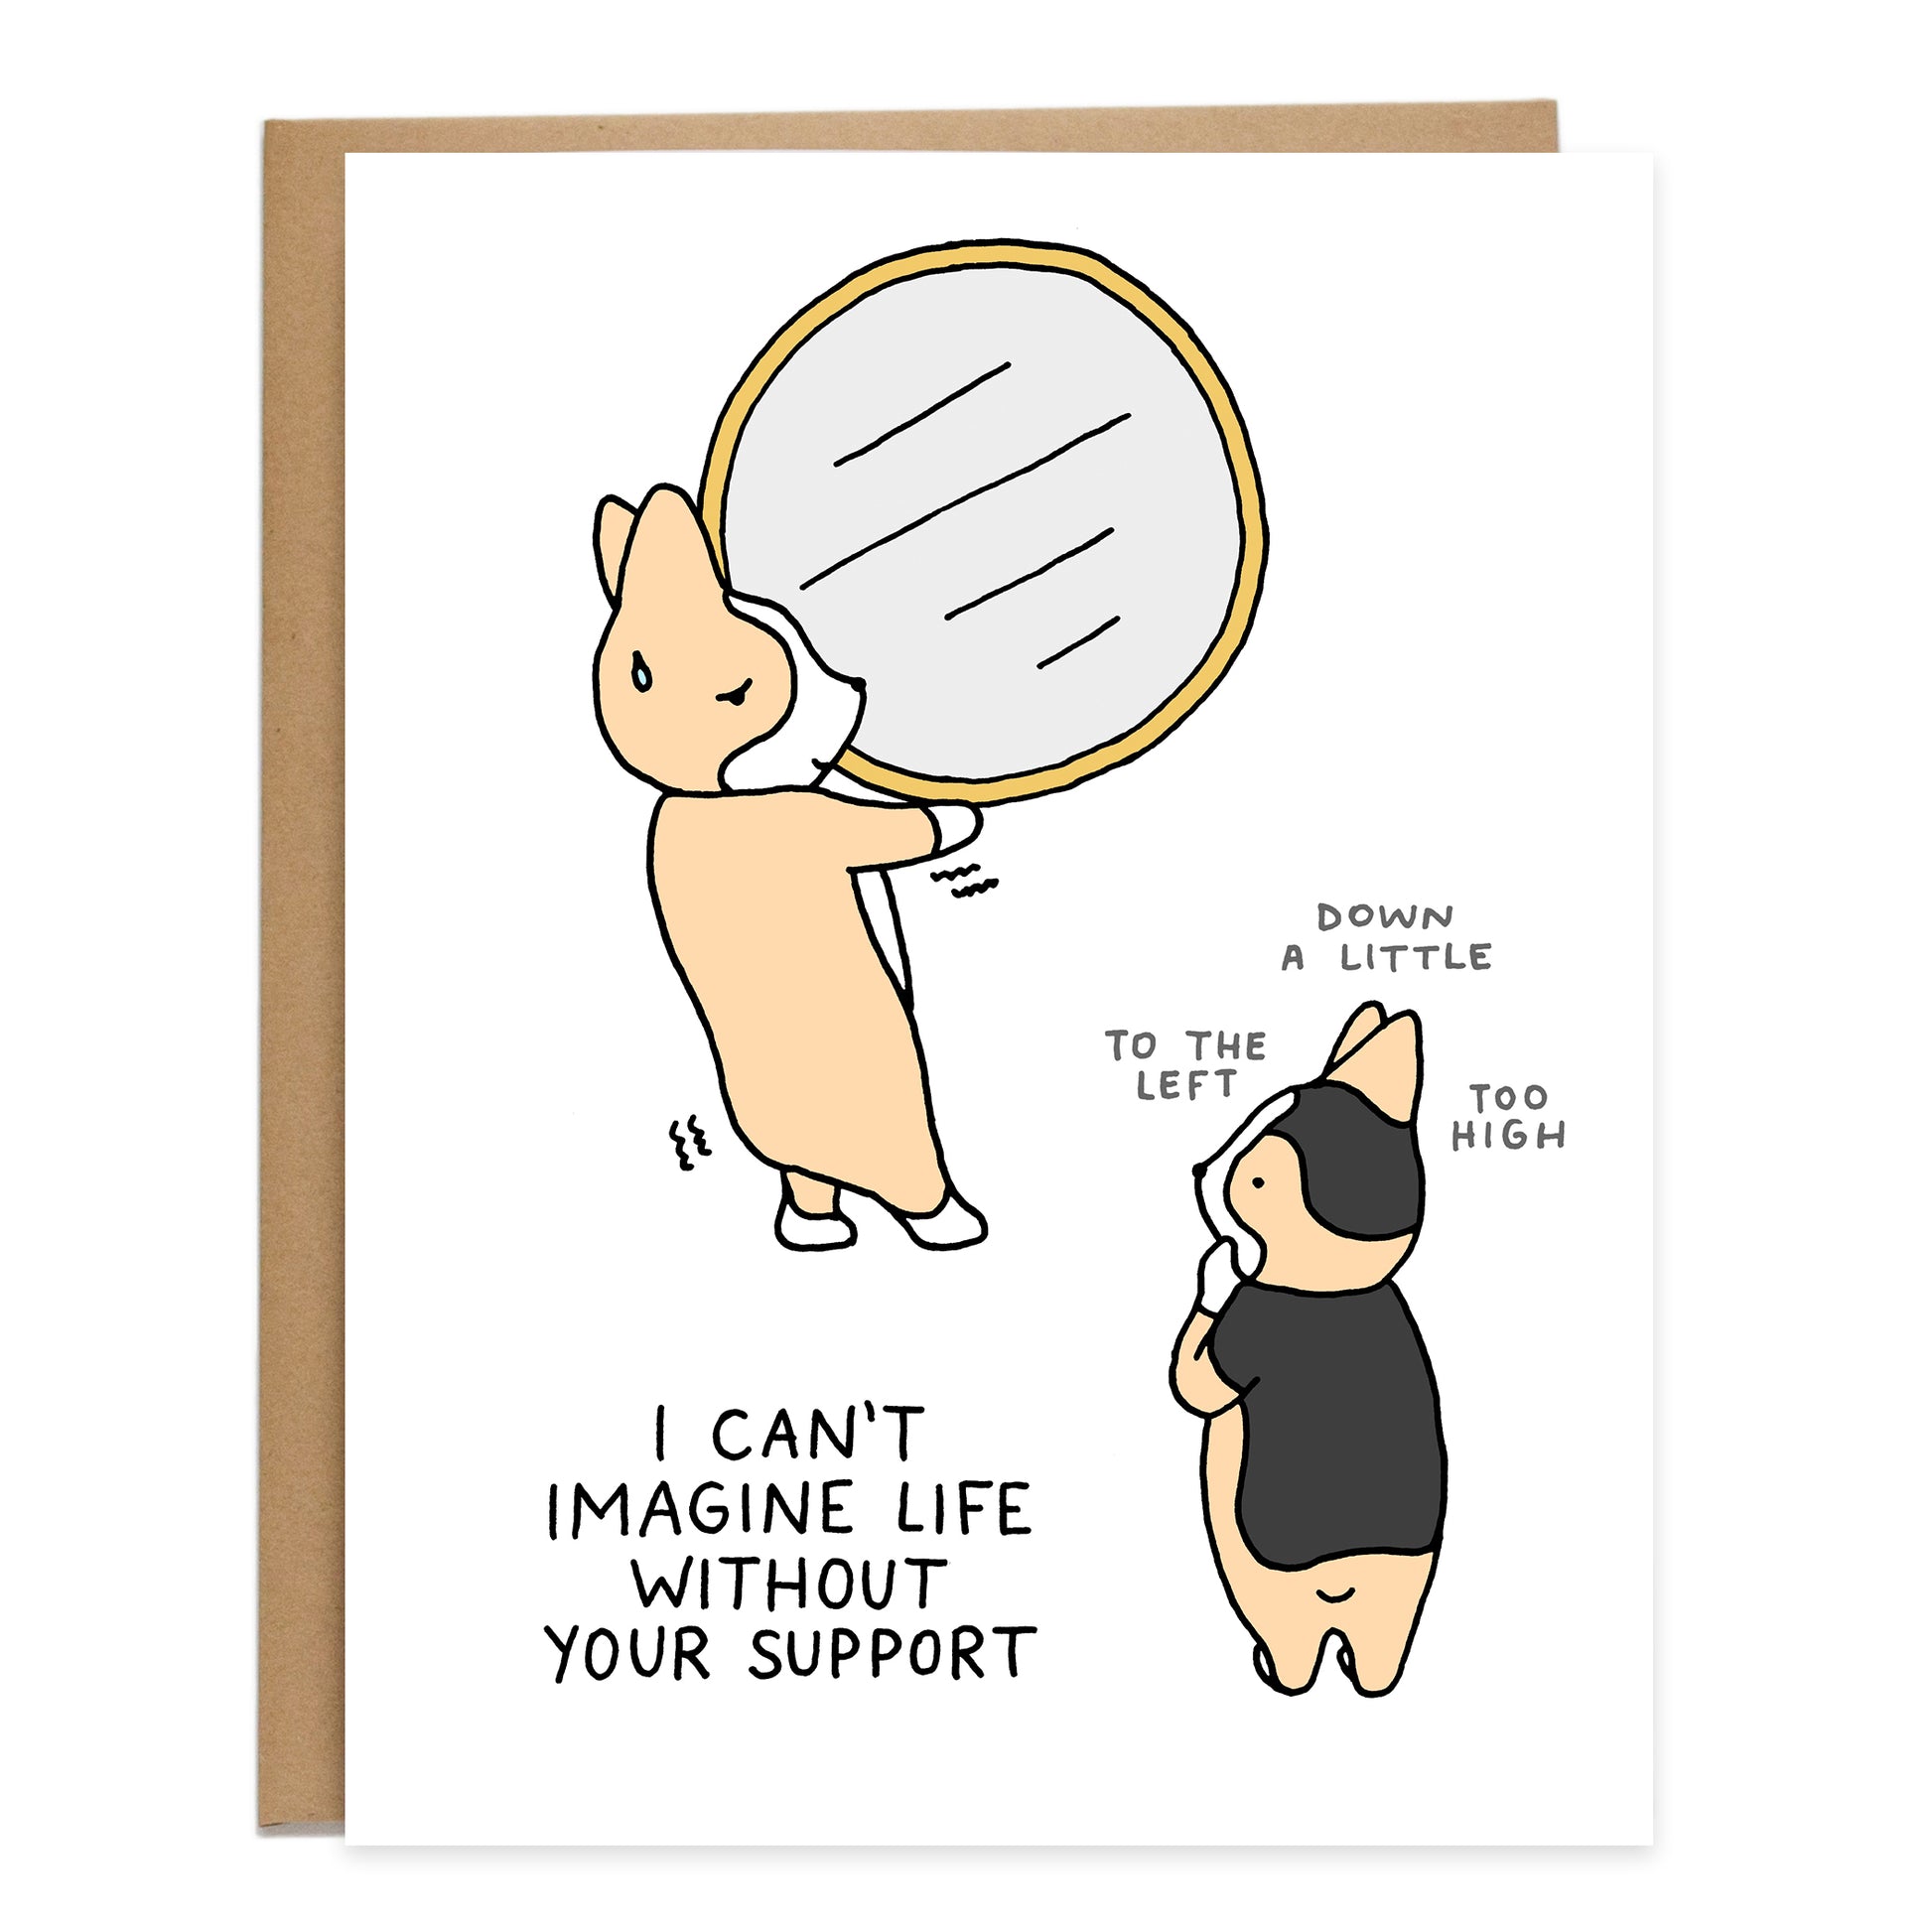 one sweaty corgi holding up a large round mirror and another corgi standing back looking for the perfect placement, text on card reads 'I can't imagine life without your support'